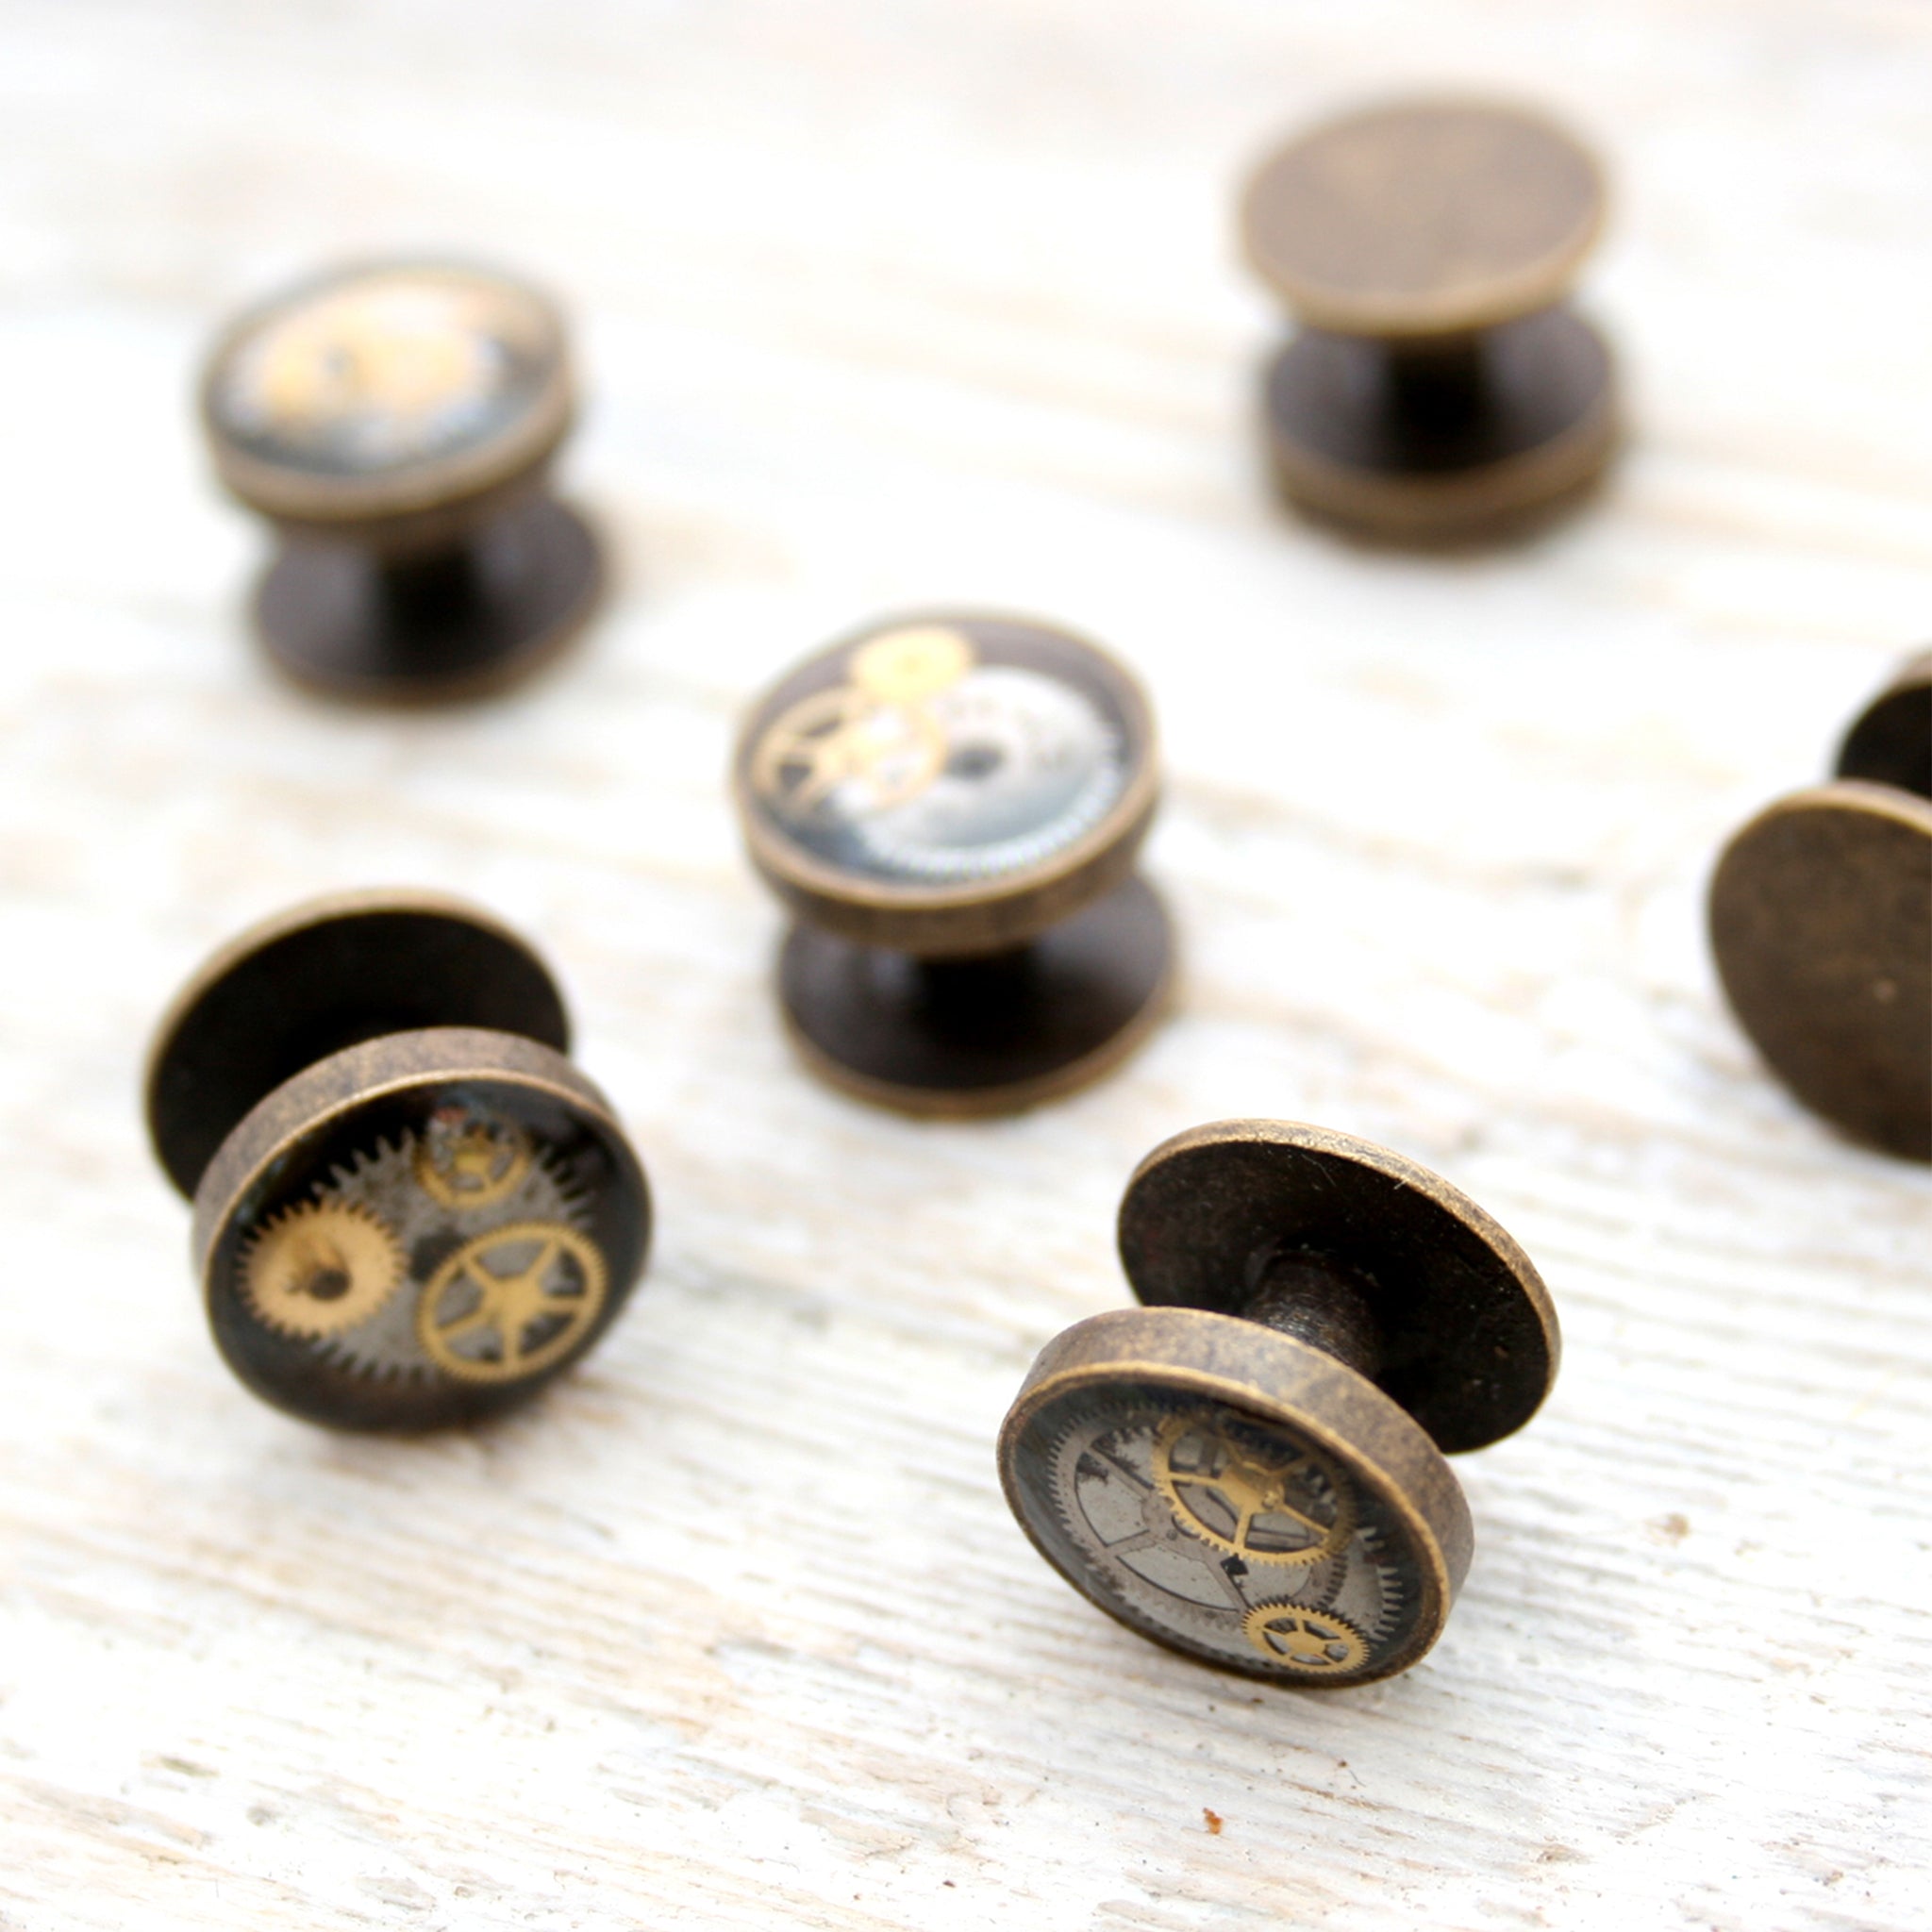 Antique bronze tone tuxedo studs featuring vintage watch parts filled with resin